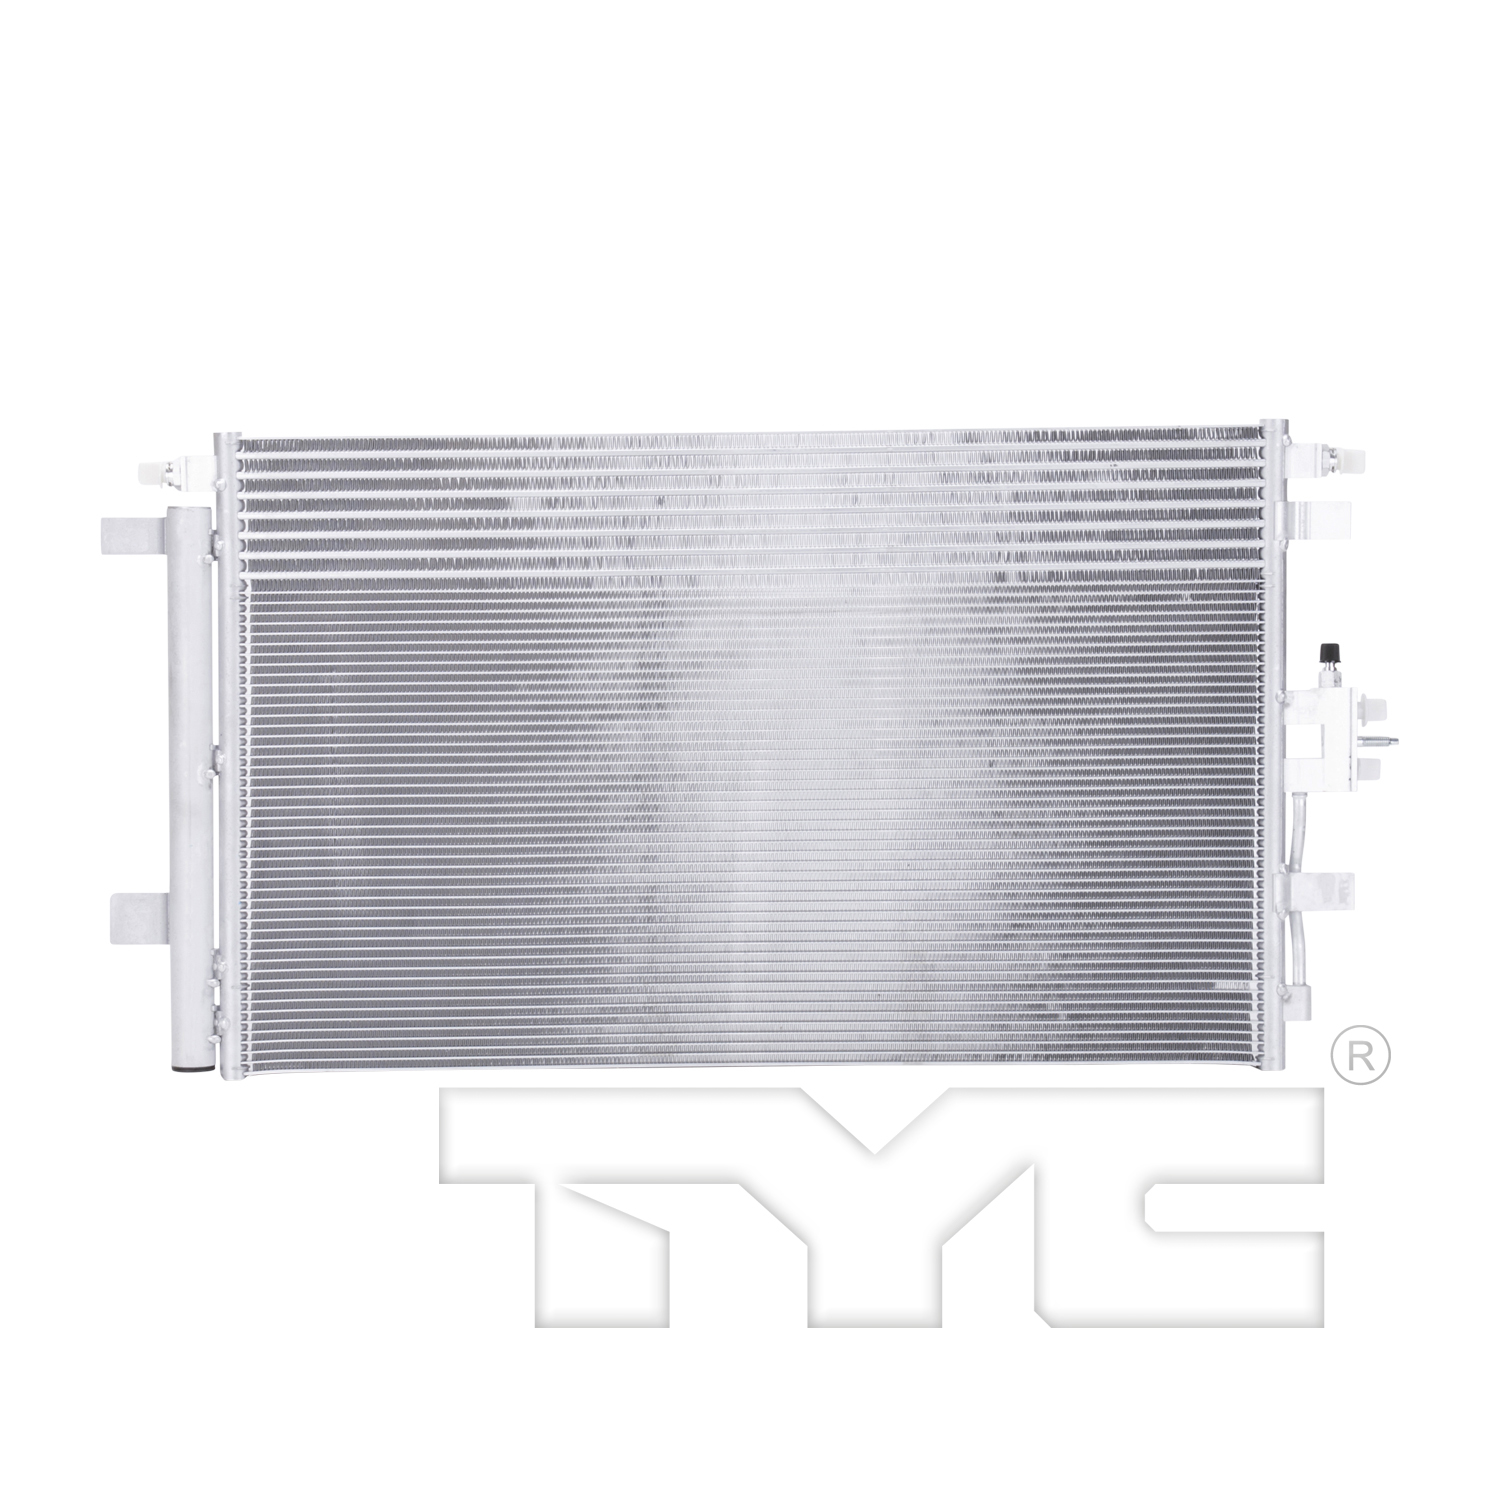 Aftermarket AC CONDENSERS for CHEVROLET - EQUINOX, EQUINOX,18-21,Air conditioning condenser